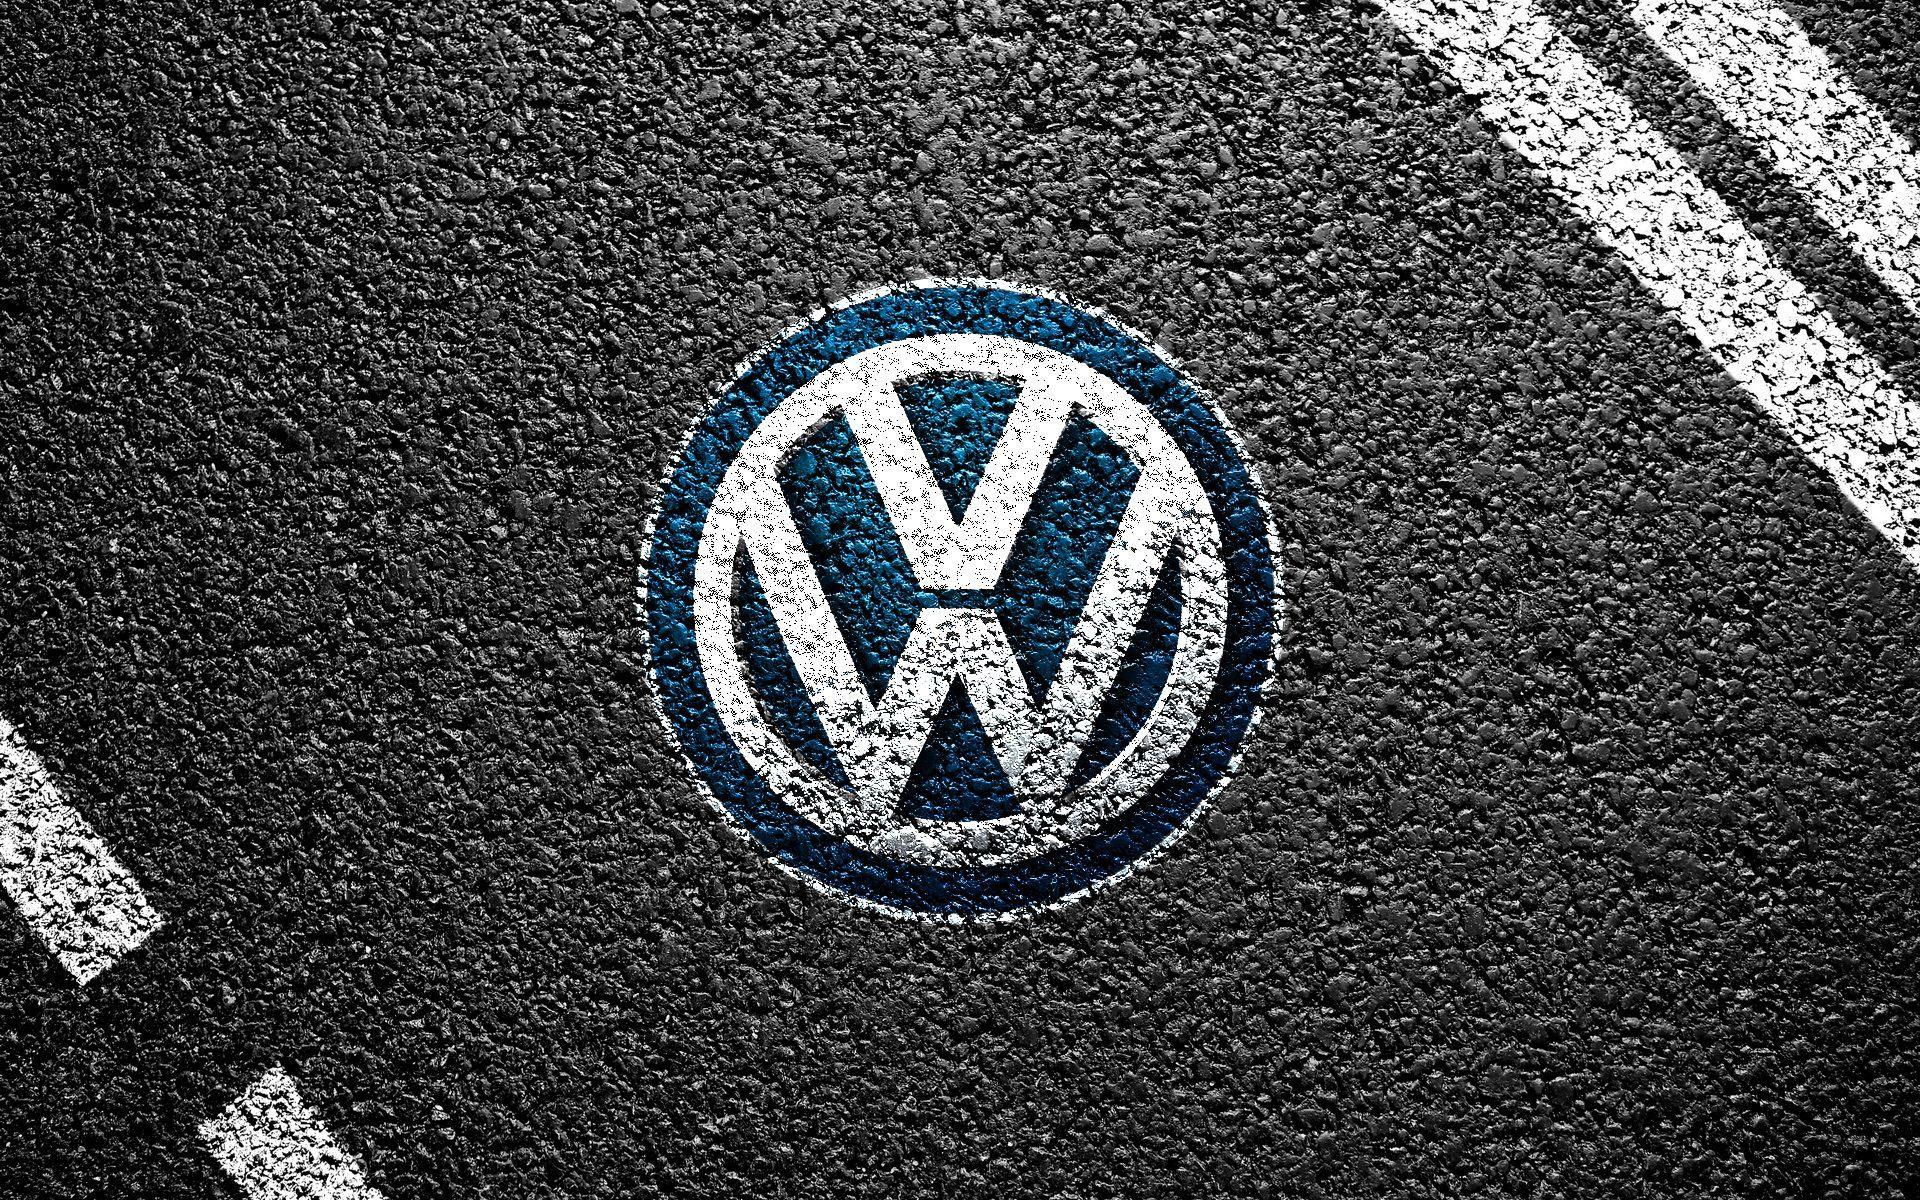 Vw Wallpapers Top Free Vw Backgrounds Wallpaperaccess